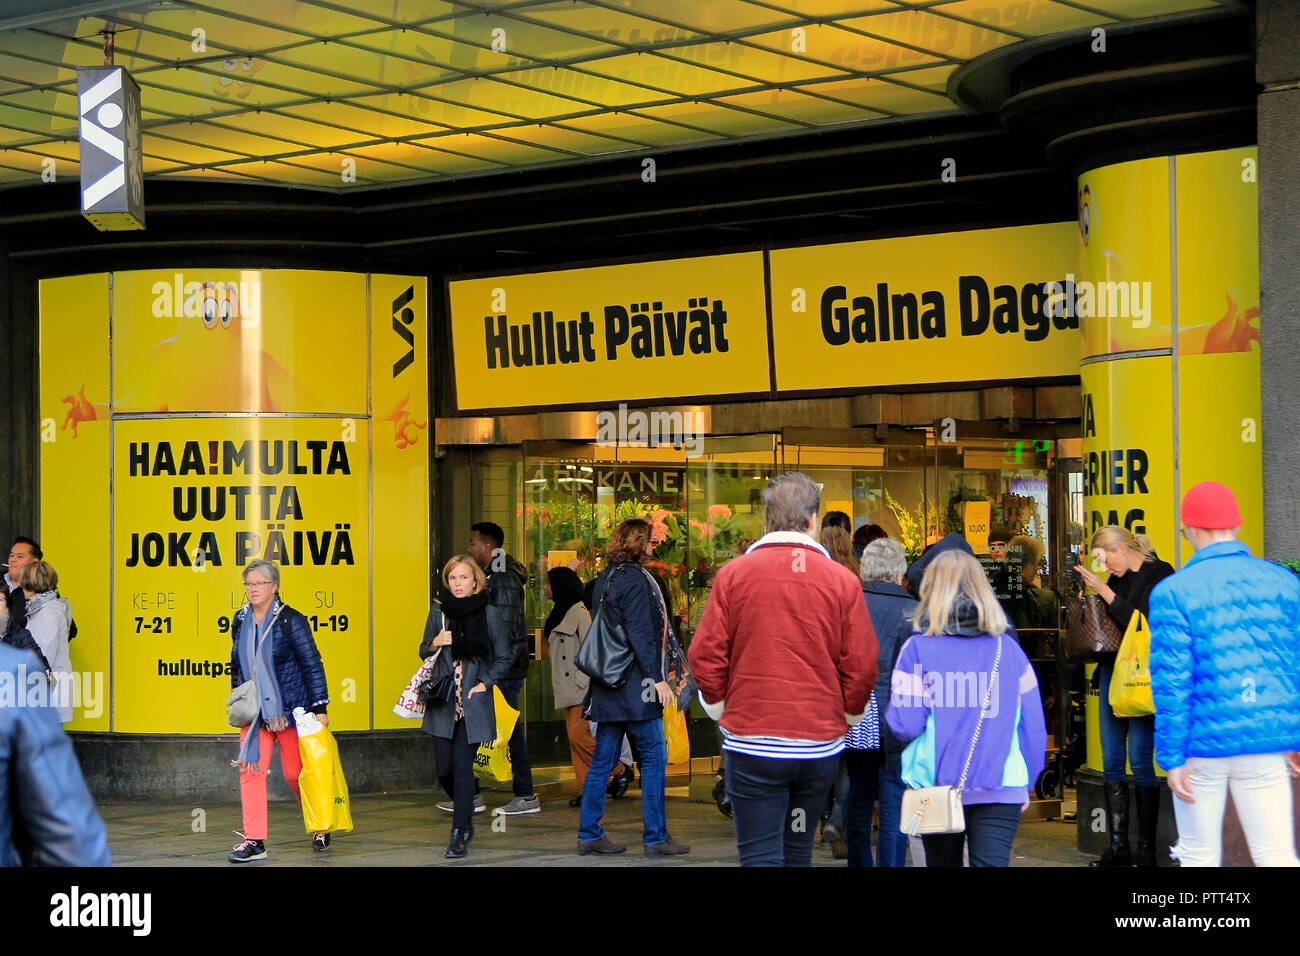 Helsinki, Finland - October 10, 2018: Crazy Days, the biannual, massive and popular 5-day sale event at Stockmann begins. In photo, the yellow entrance of the Helsinki flagship store. Credit: Taina Sohlman/Alamy Live News Stock Photo